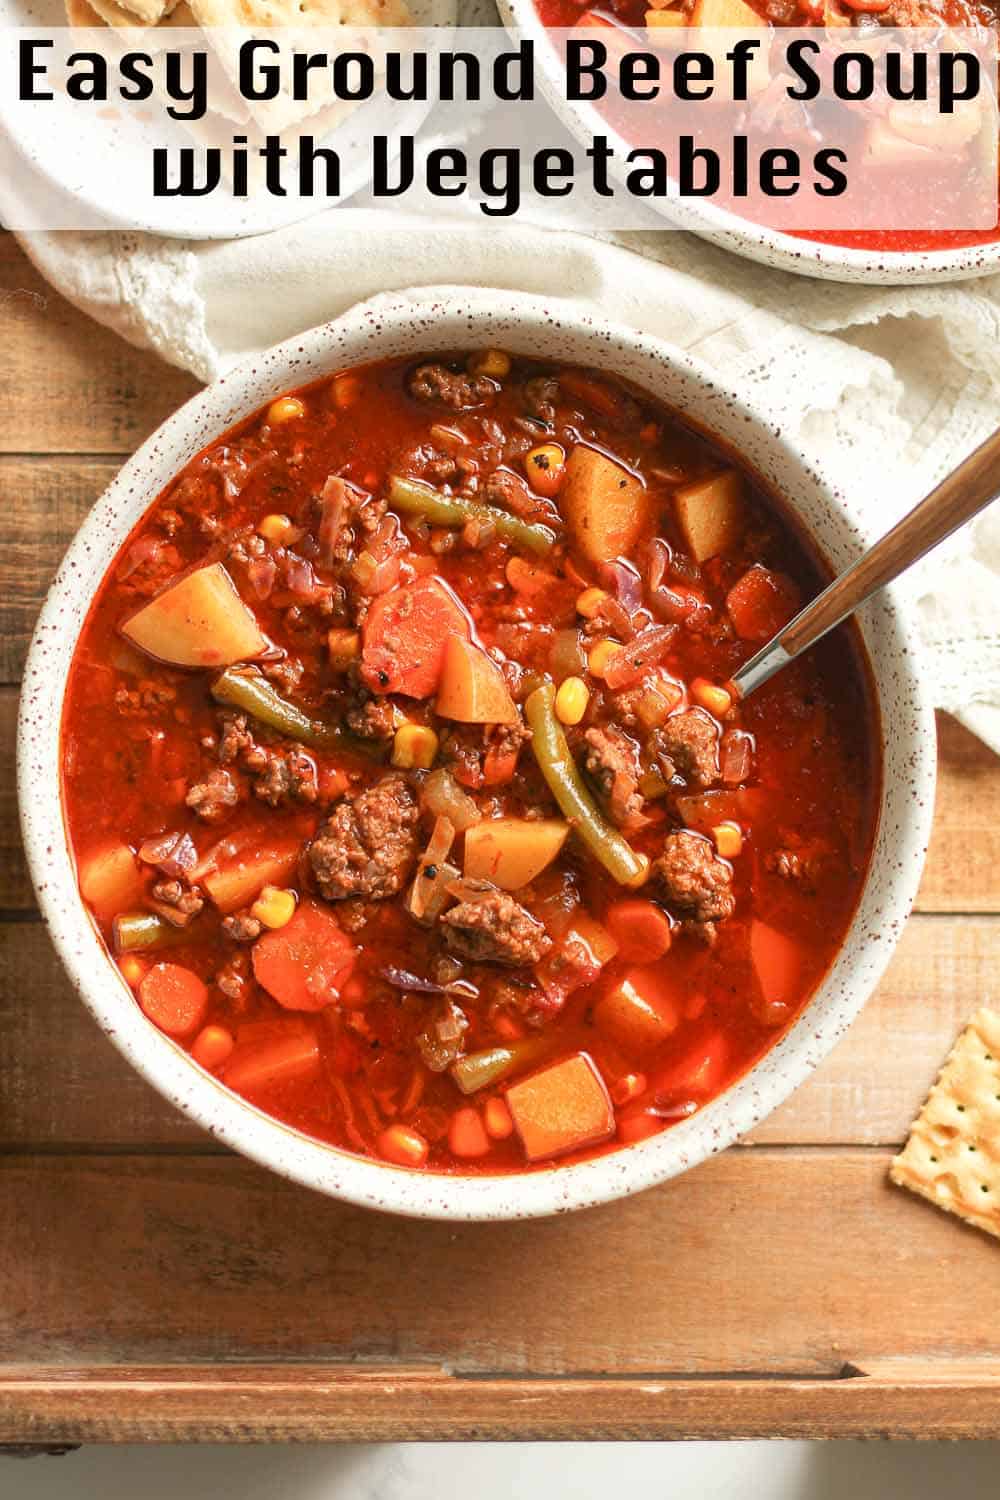 A bowl of ground beef soup with vegetables.